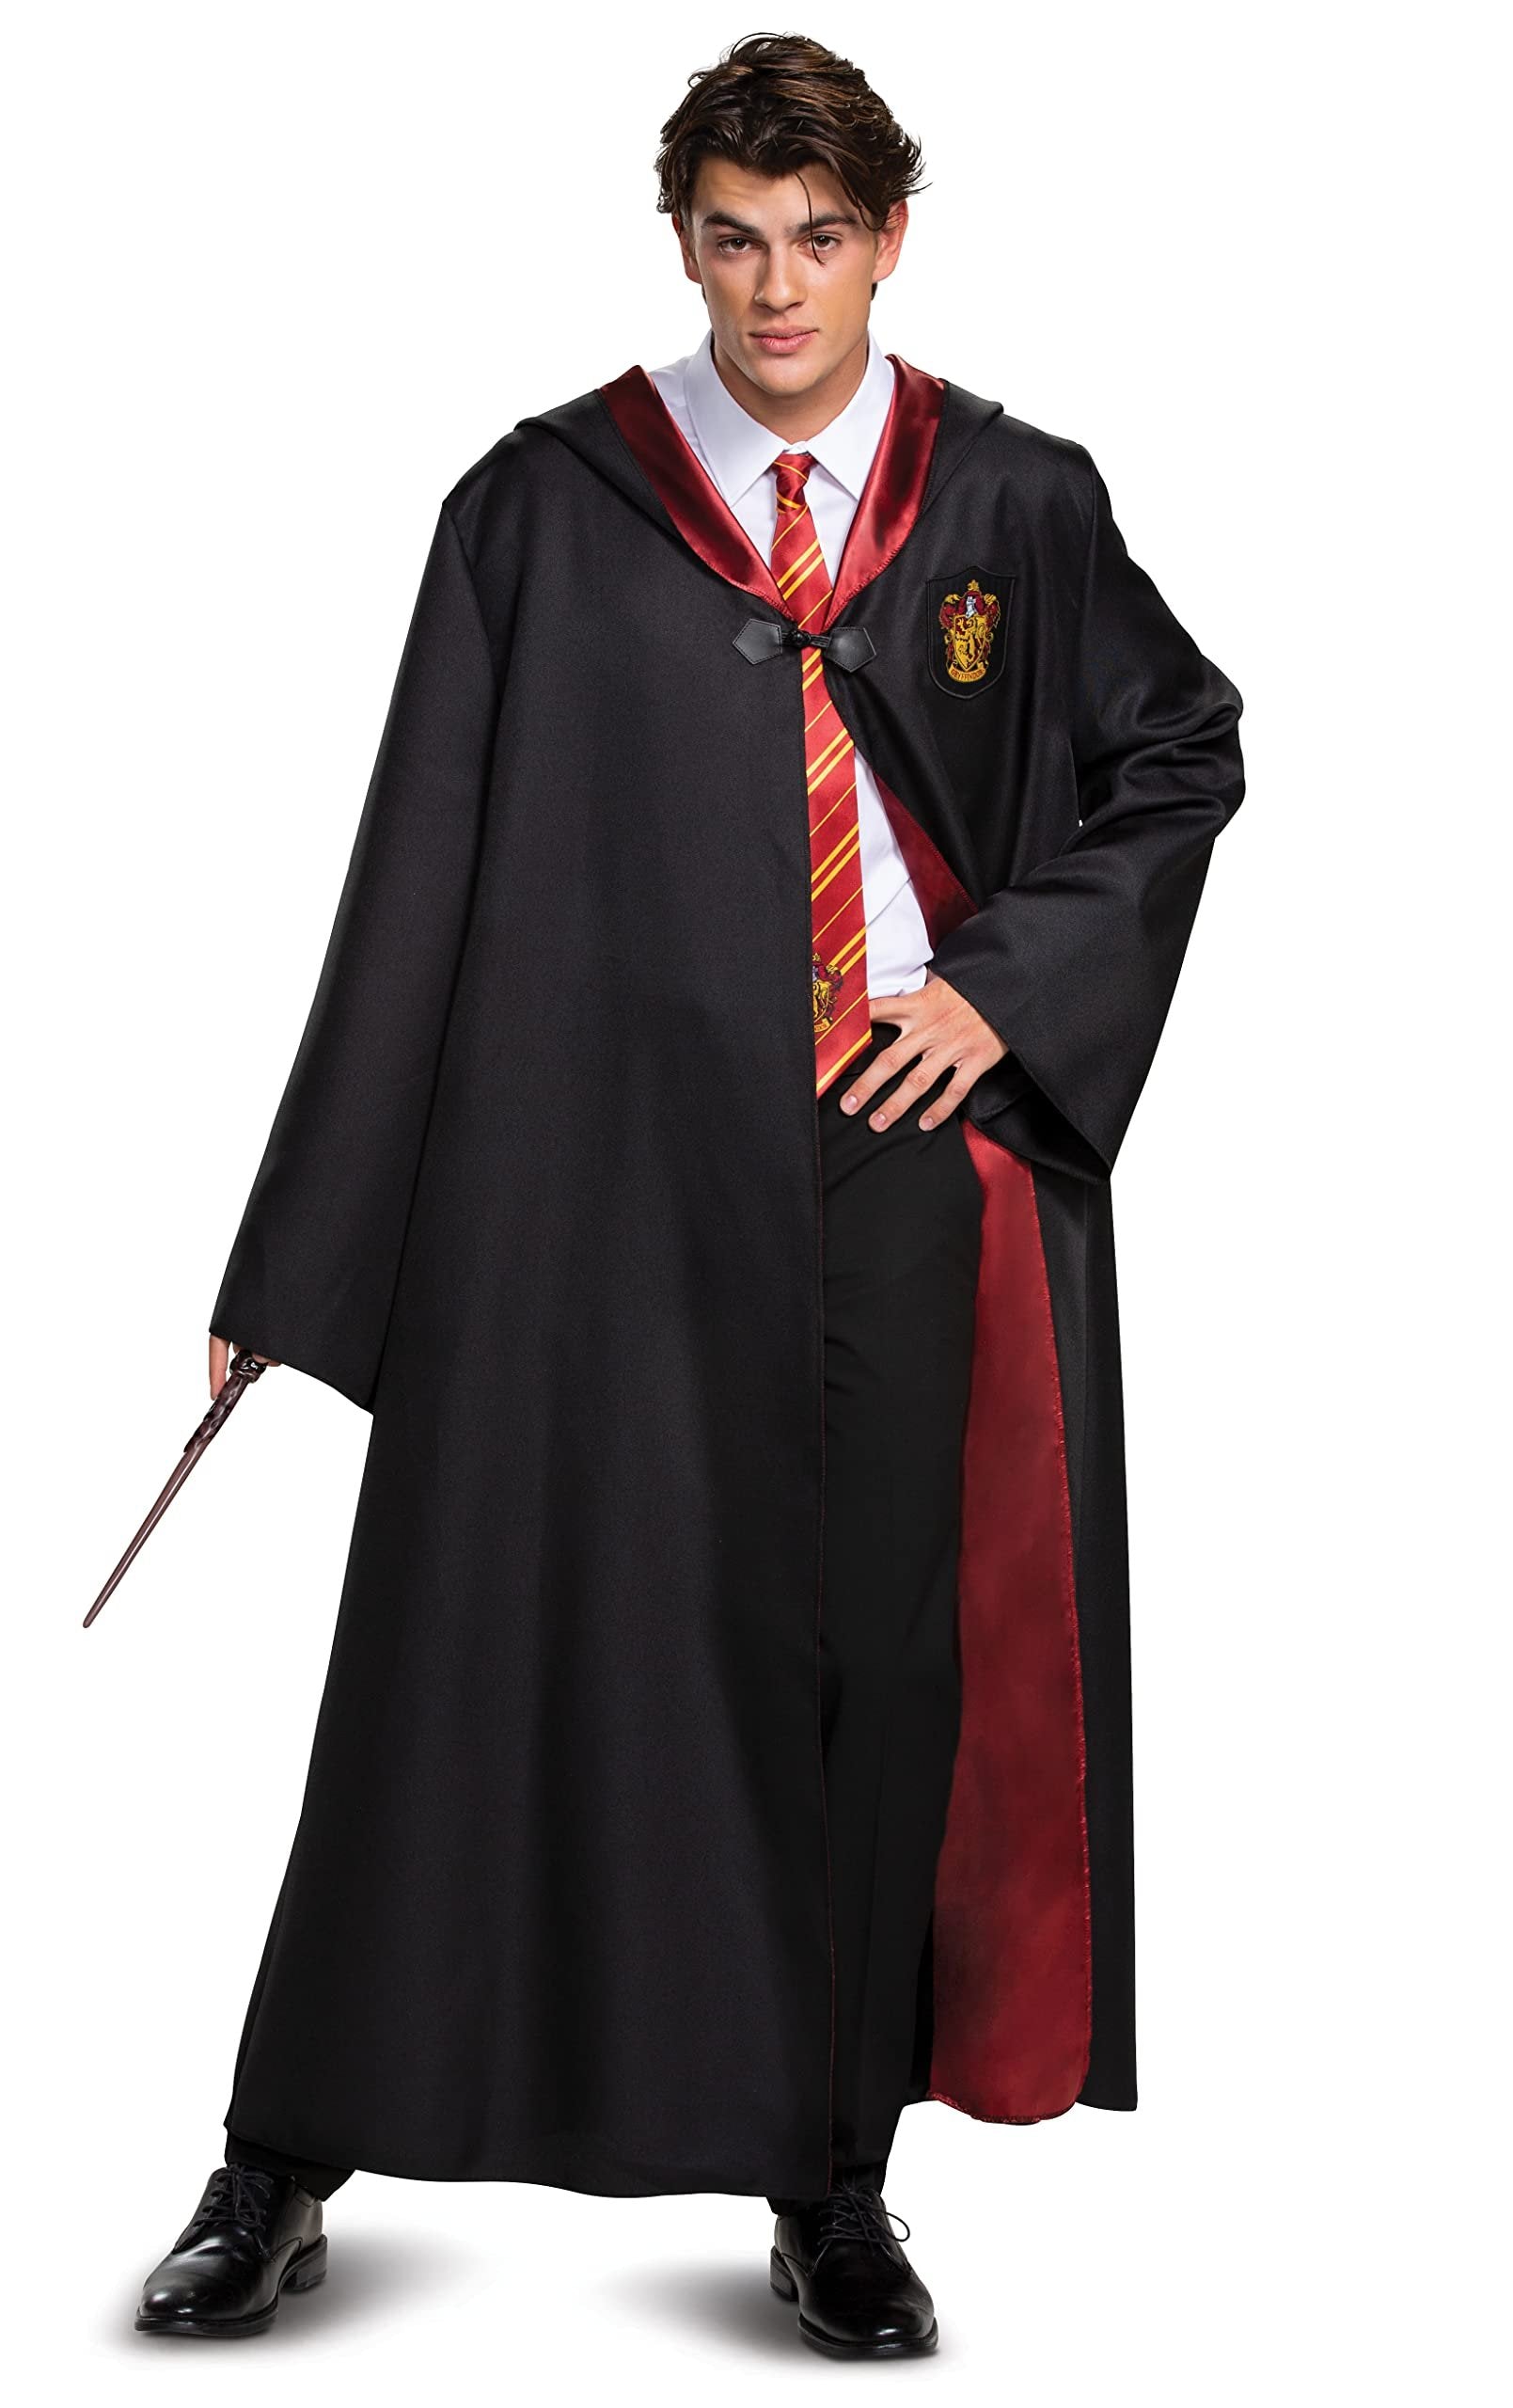 Disguise Harry Potter Gryffindor Costume Combo, Deluxe Hooded Robe with Tie for Adults, As Shown, Extra Large (50-52)